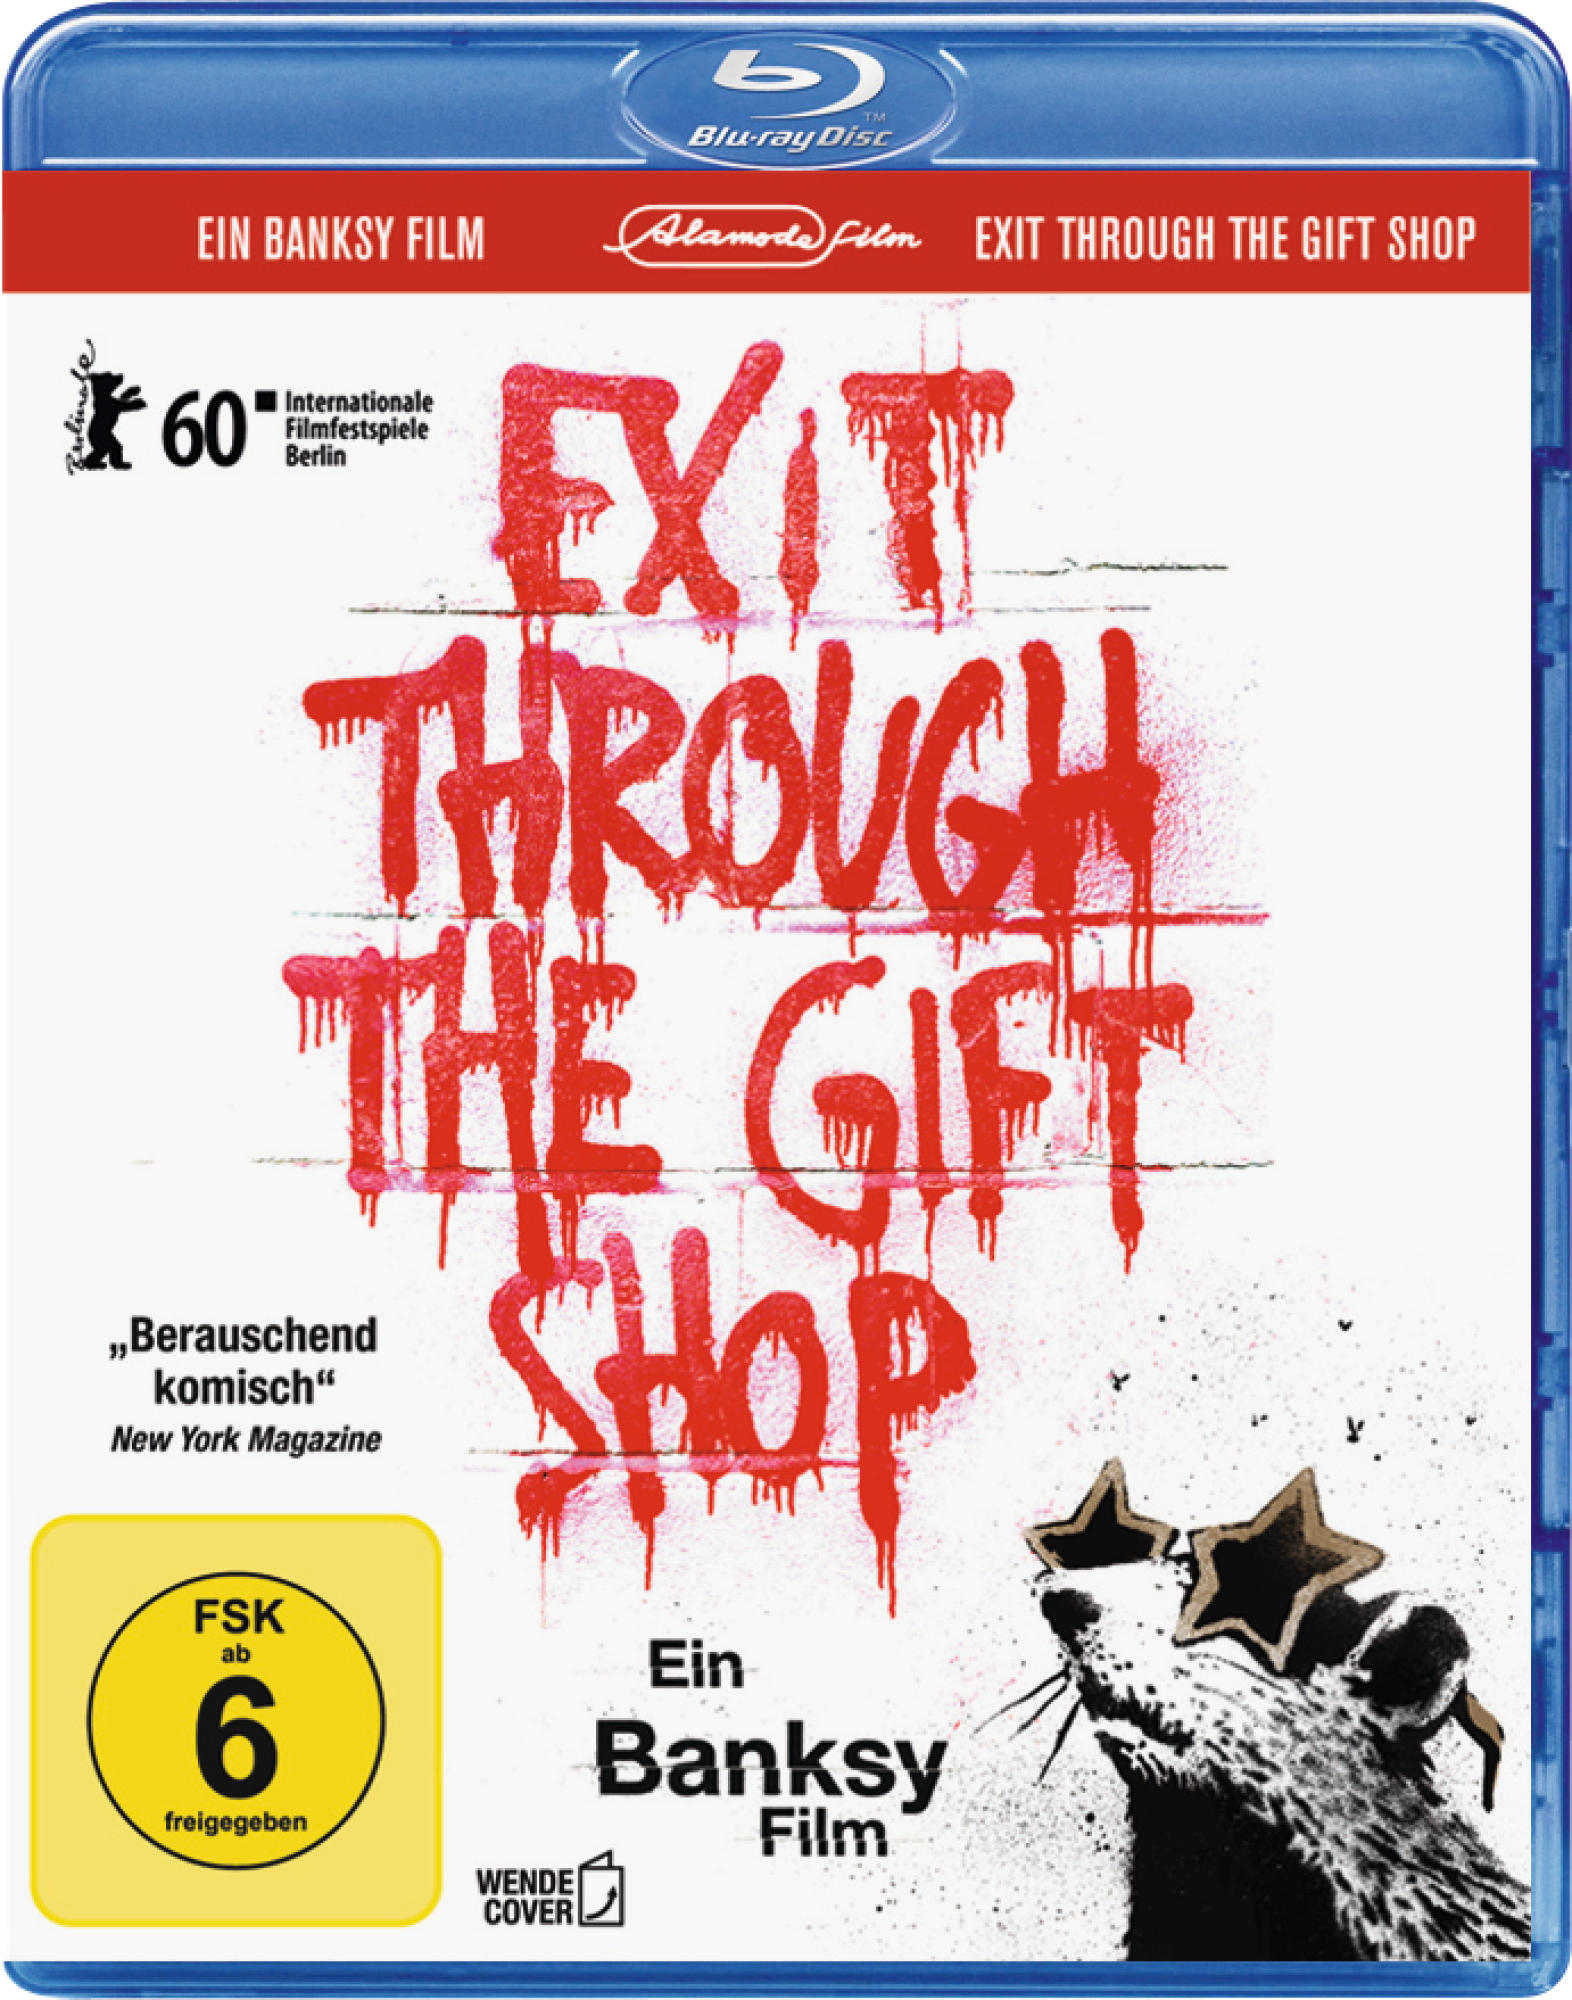 Blu-ray Shop Gift Through the Exit